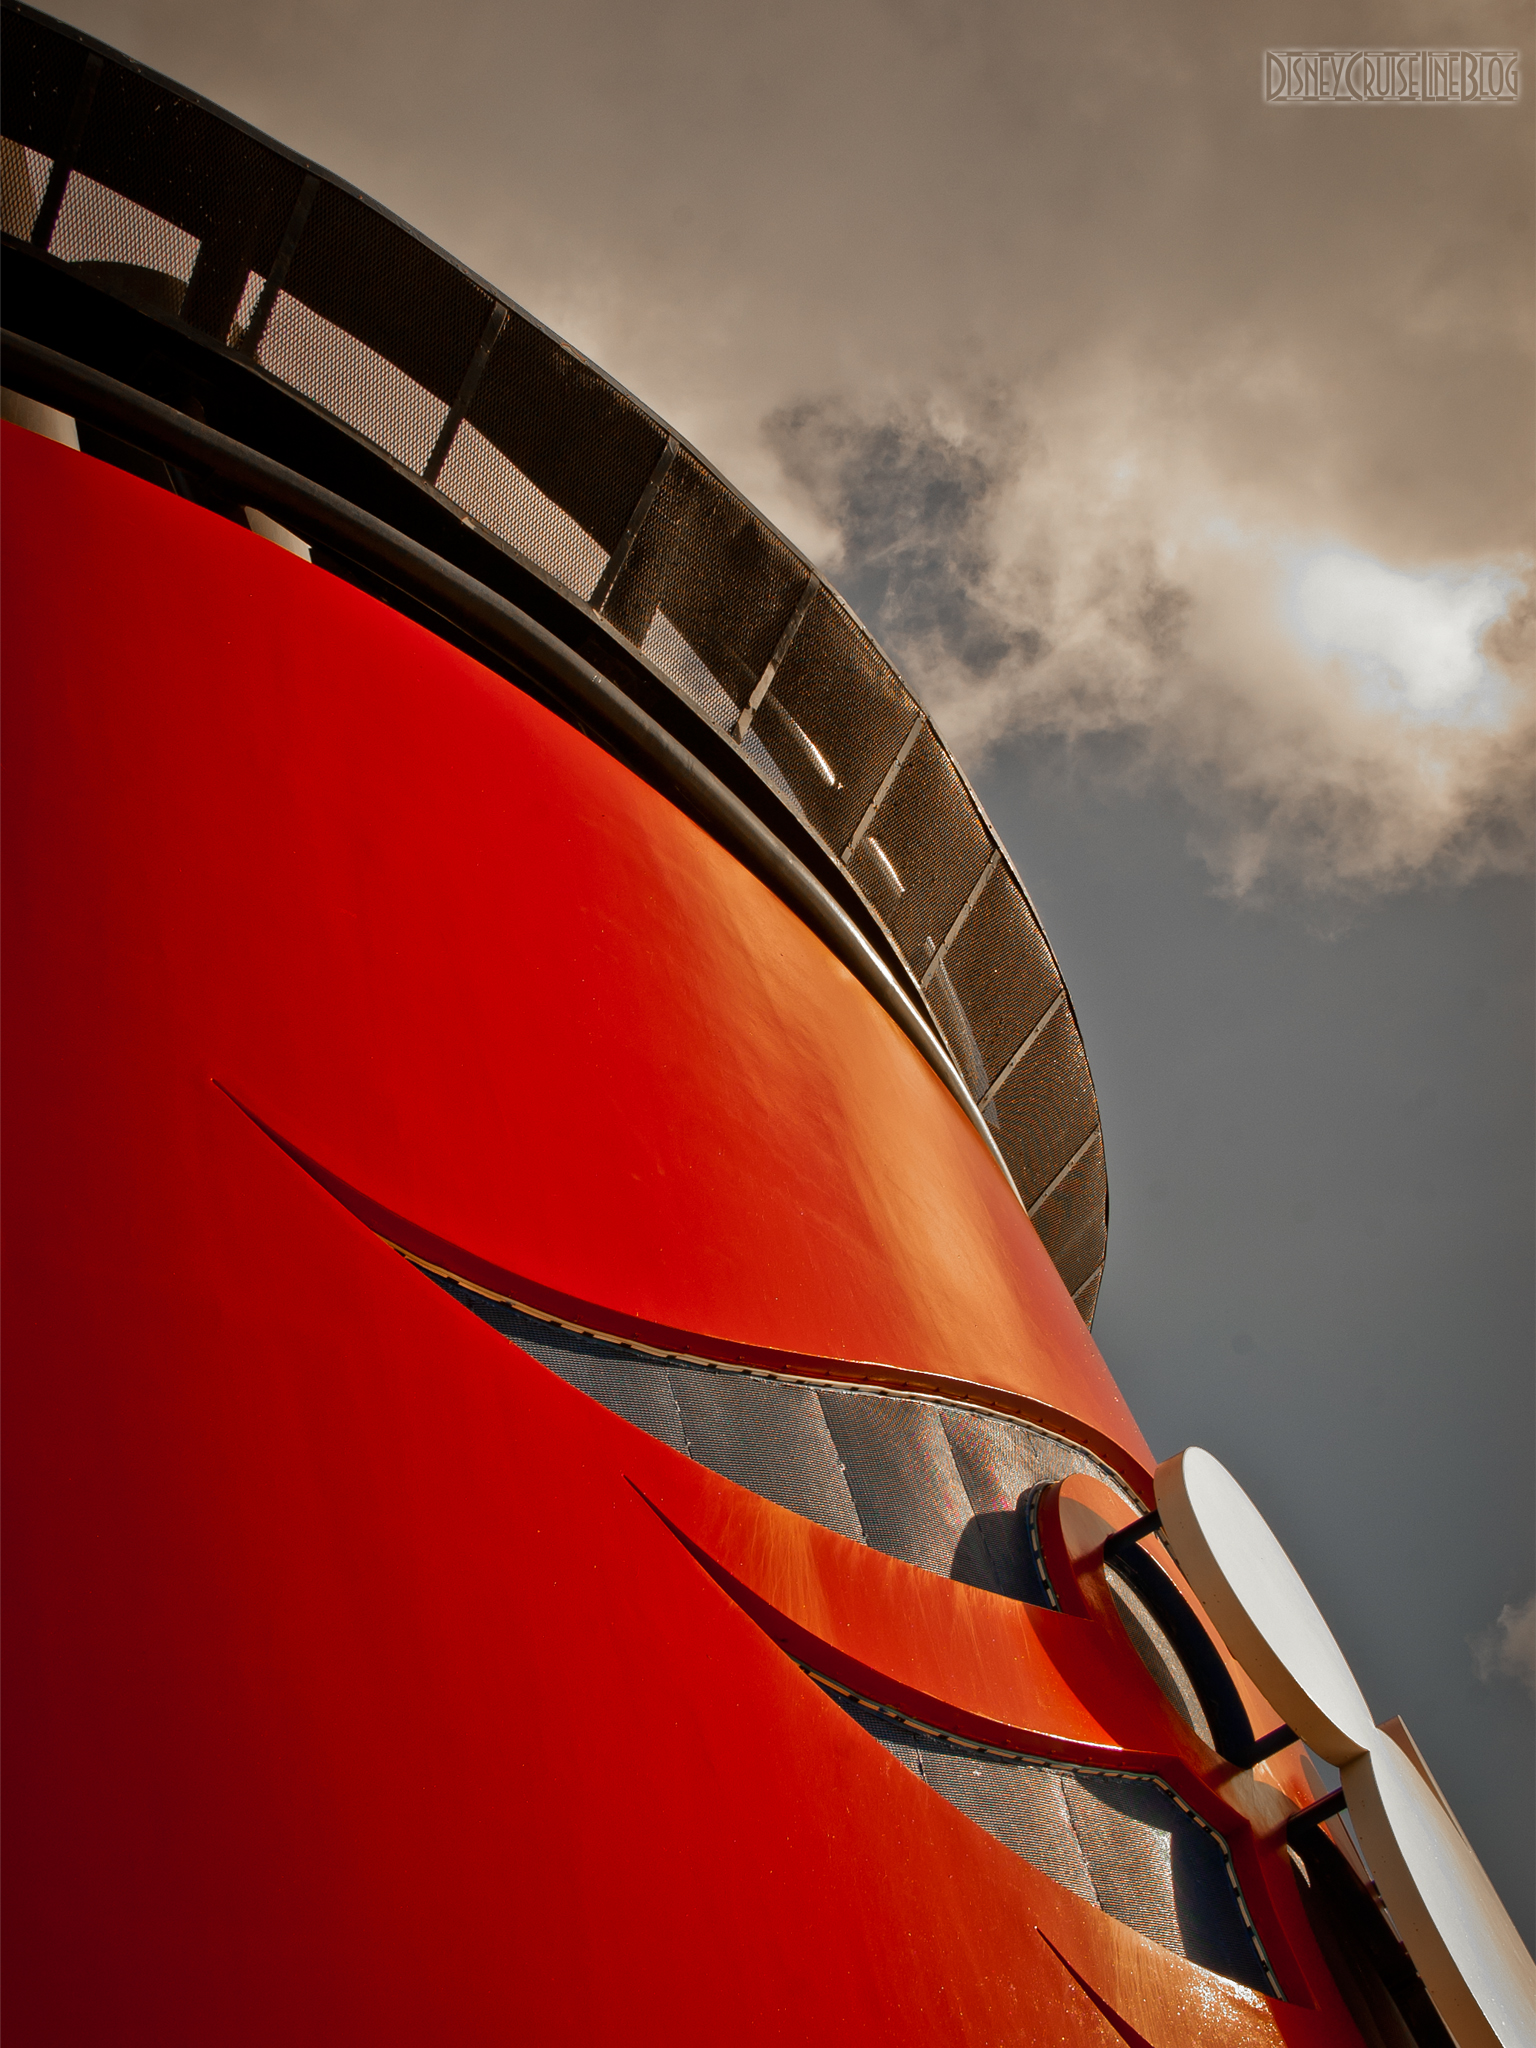 Wallpaper Collection Updated With Iphone 6 Iphone 6 Plus Wallpapers The Disney Cruise Line Blog